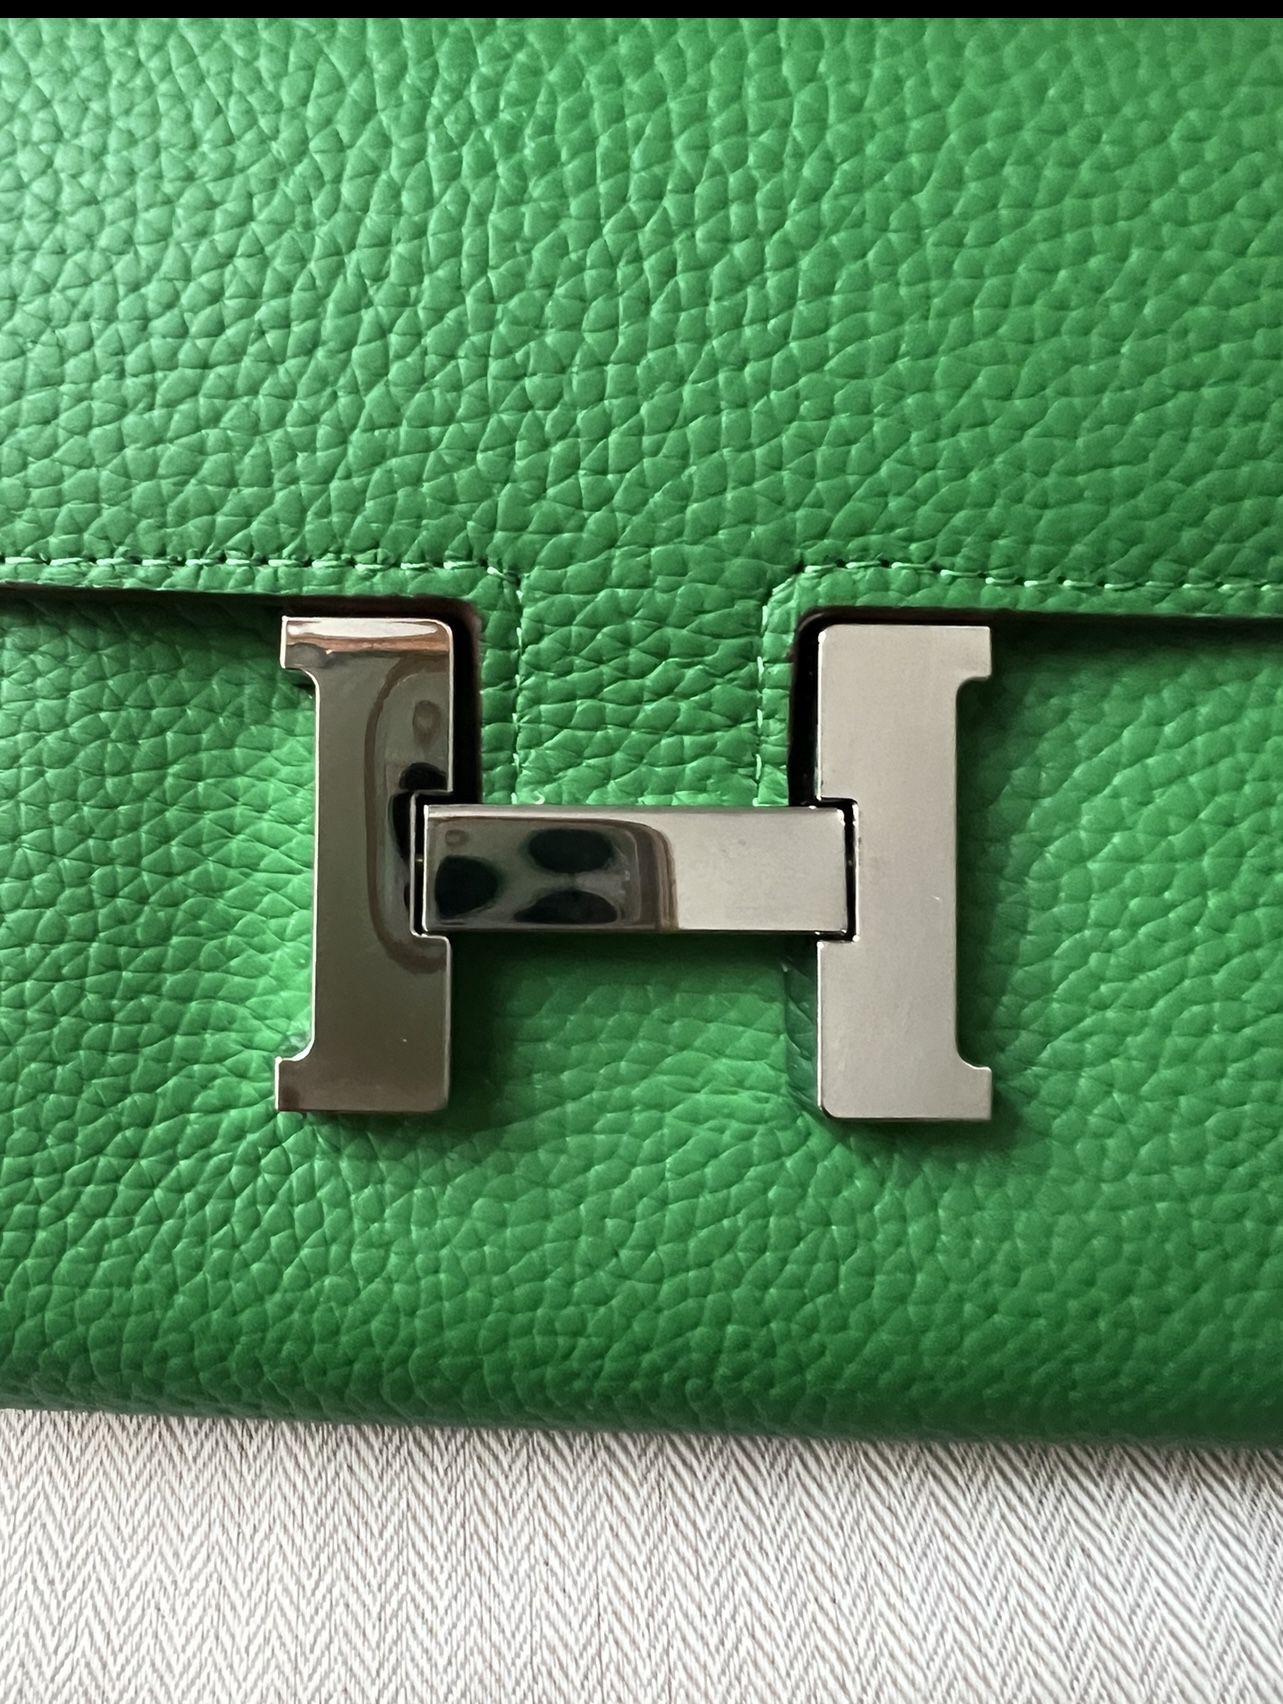 HERMES Wallet With Smaller Wallet Inside Brown , Orange, Or Green To Choose  From Quality Satisfaction Guaranteed for Sale in Halndle Bch, FL - OfferUp